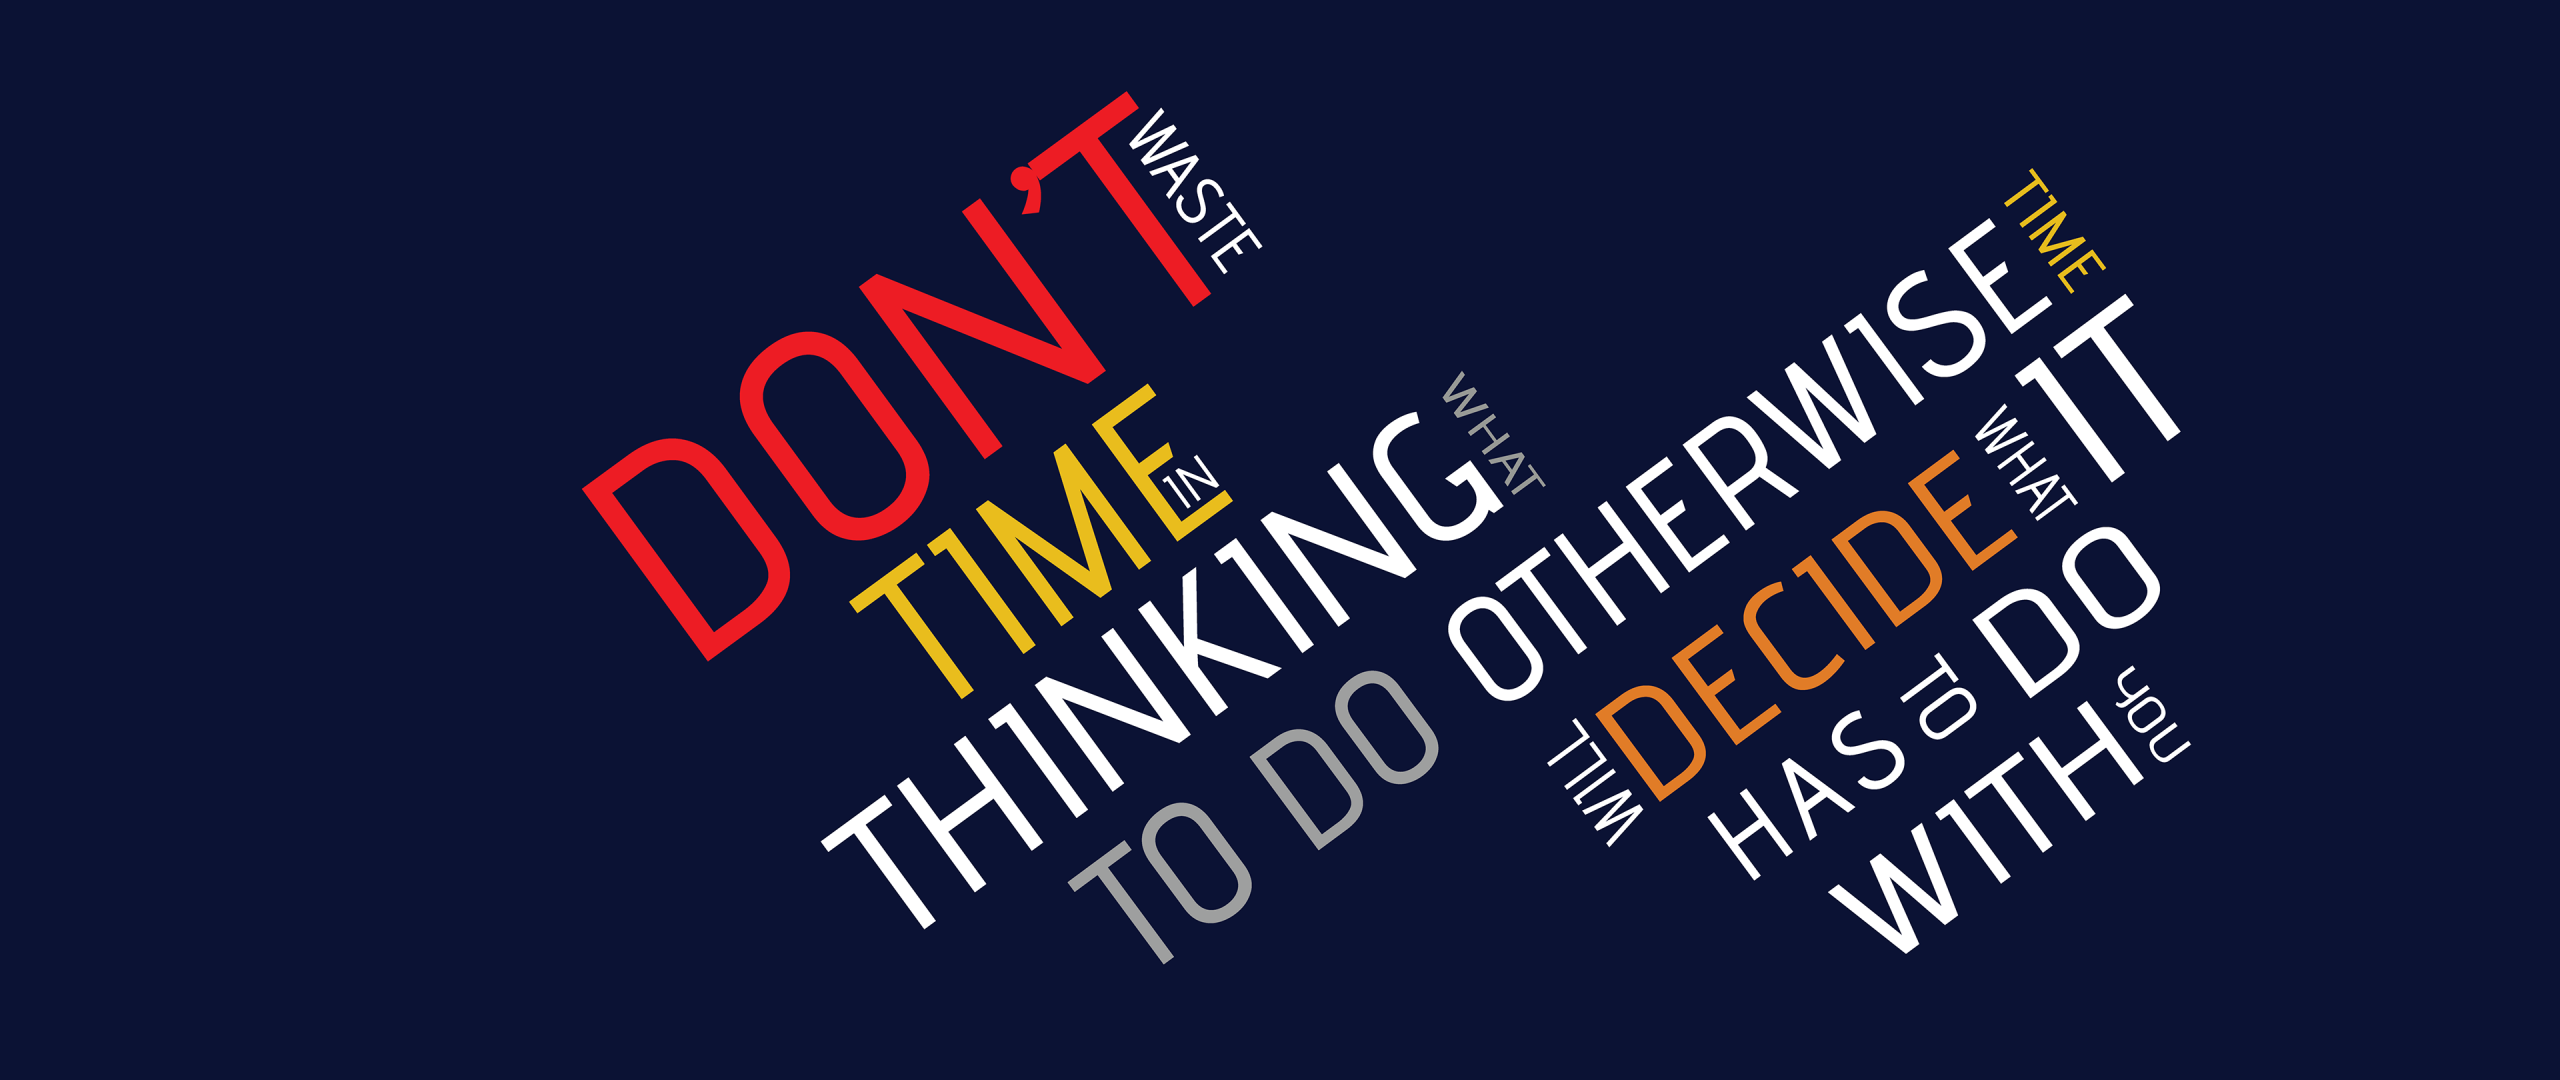 Dont Waste Time Wallpaper 4K Popular quotes 6179